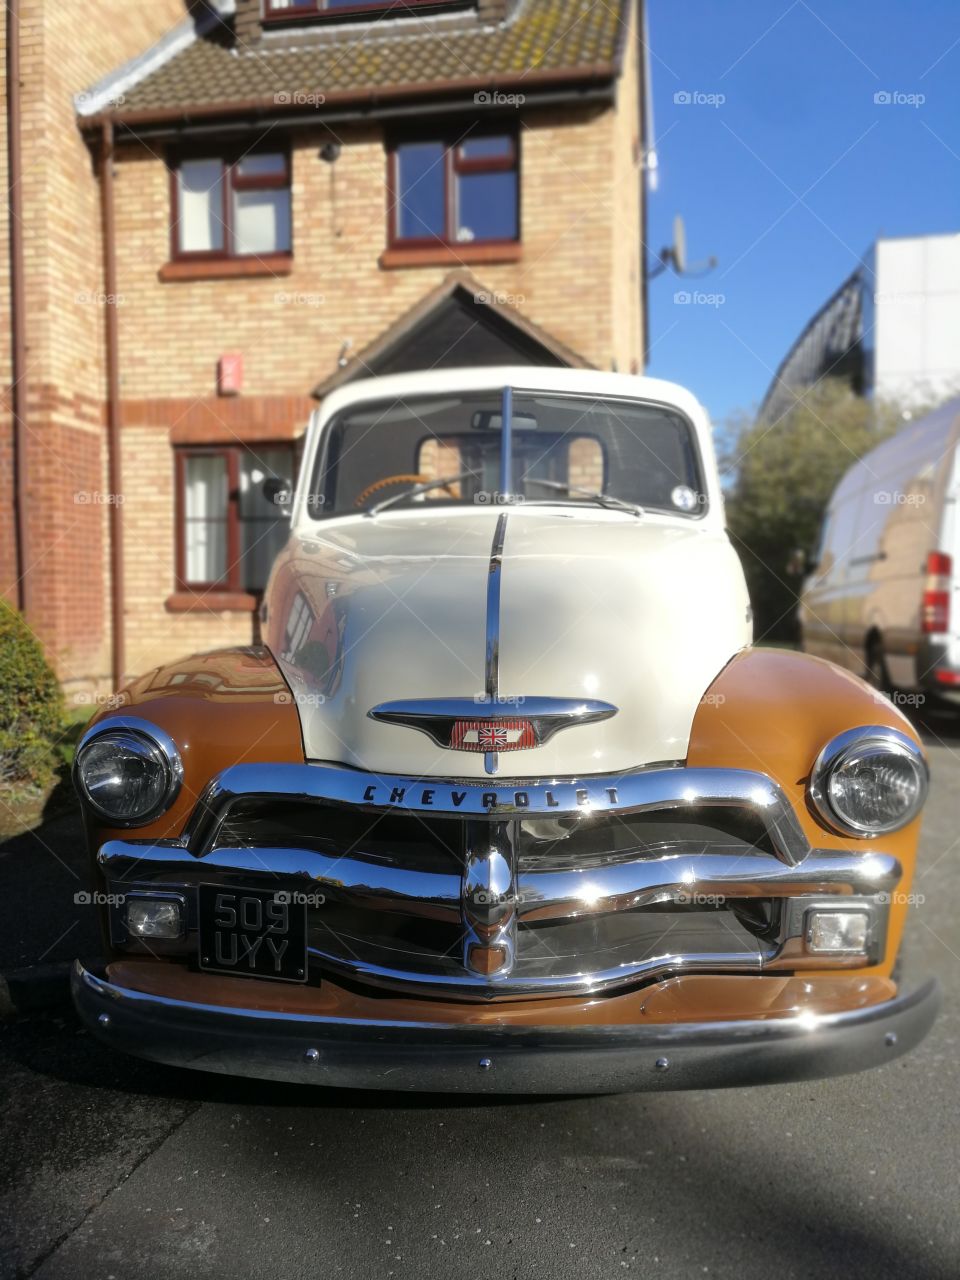 1950's classic car front